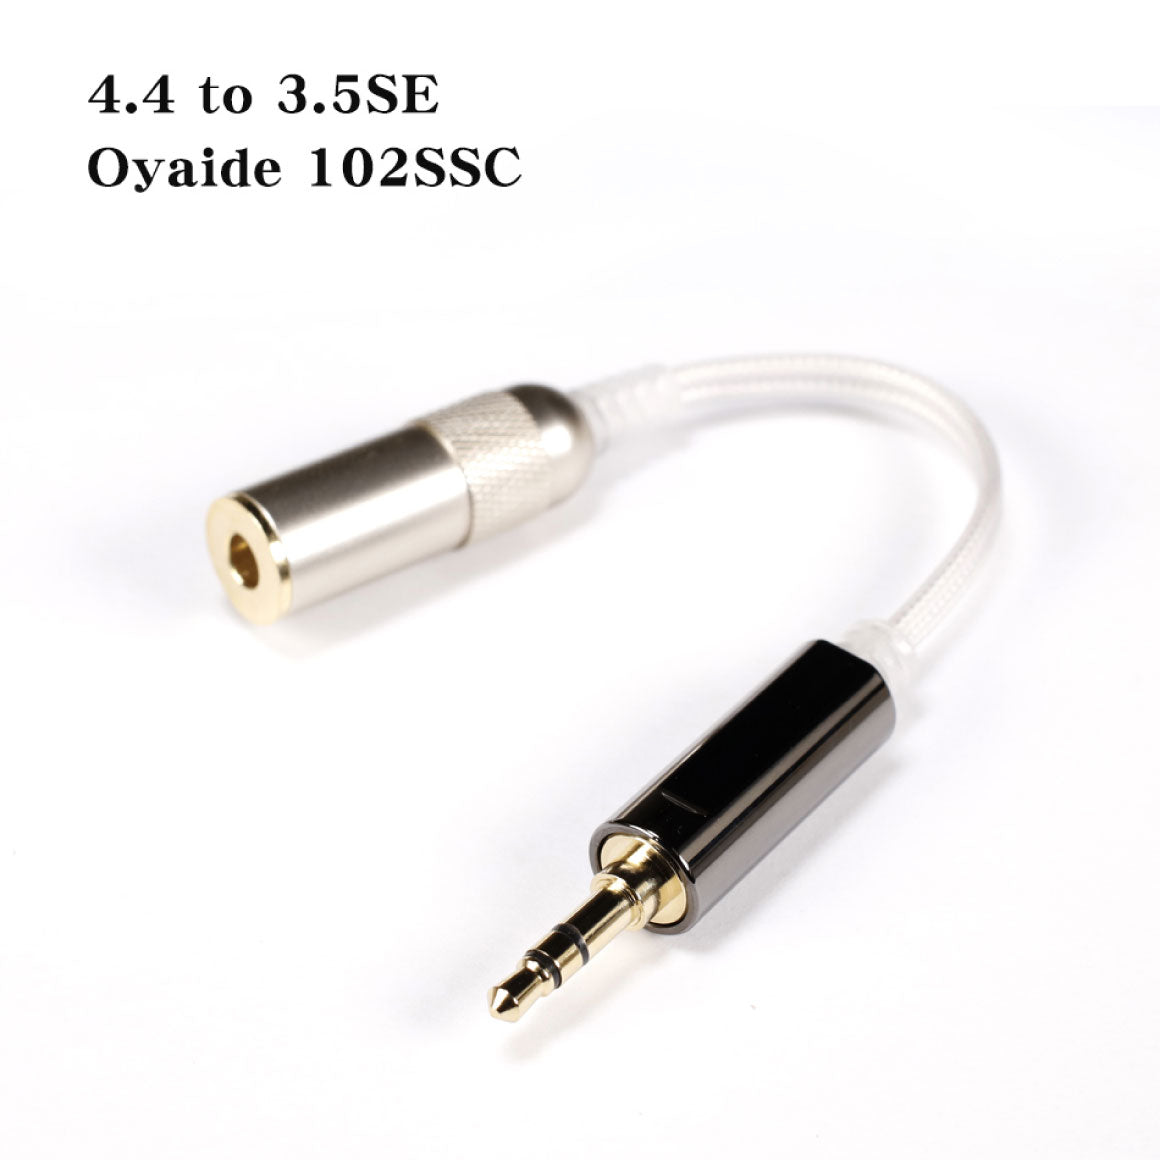 Headphone-Zone-Venture Electronics - Adapter Cables - 4.4mm Female - 3.5 SE